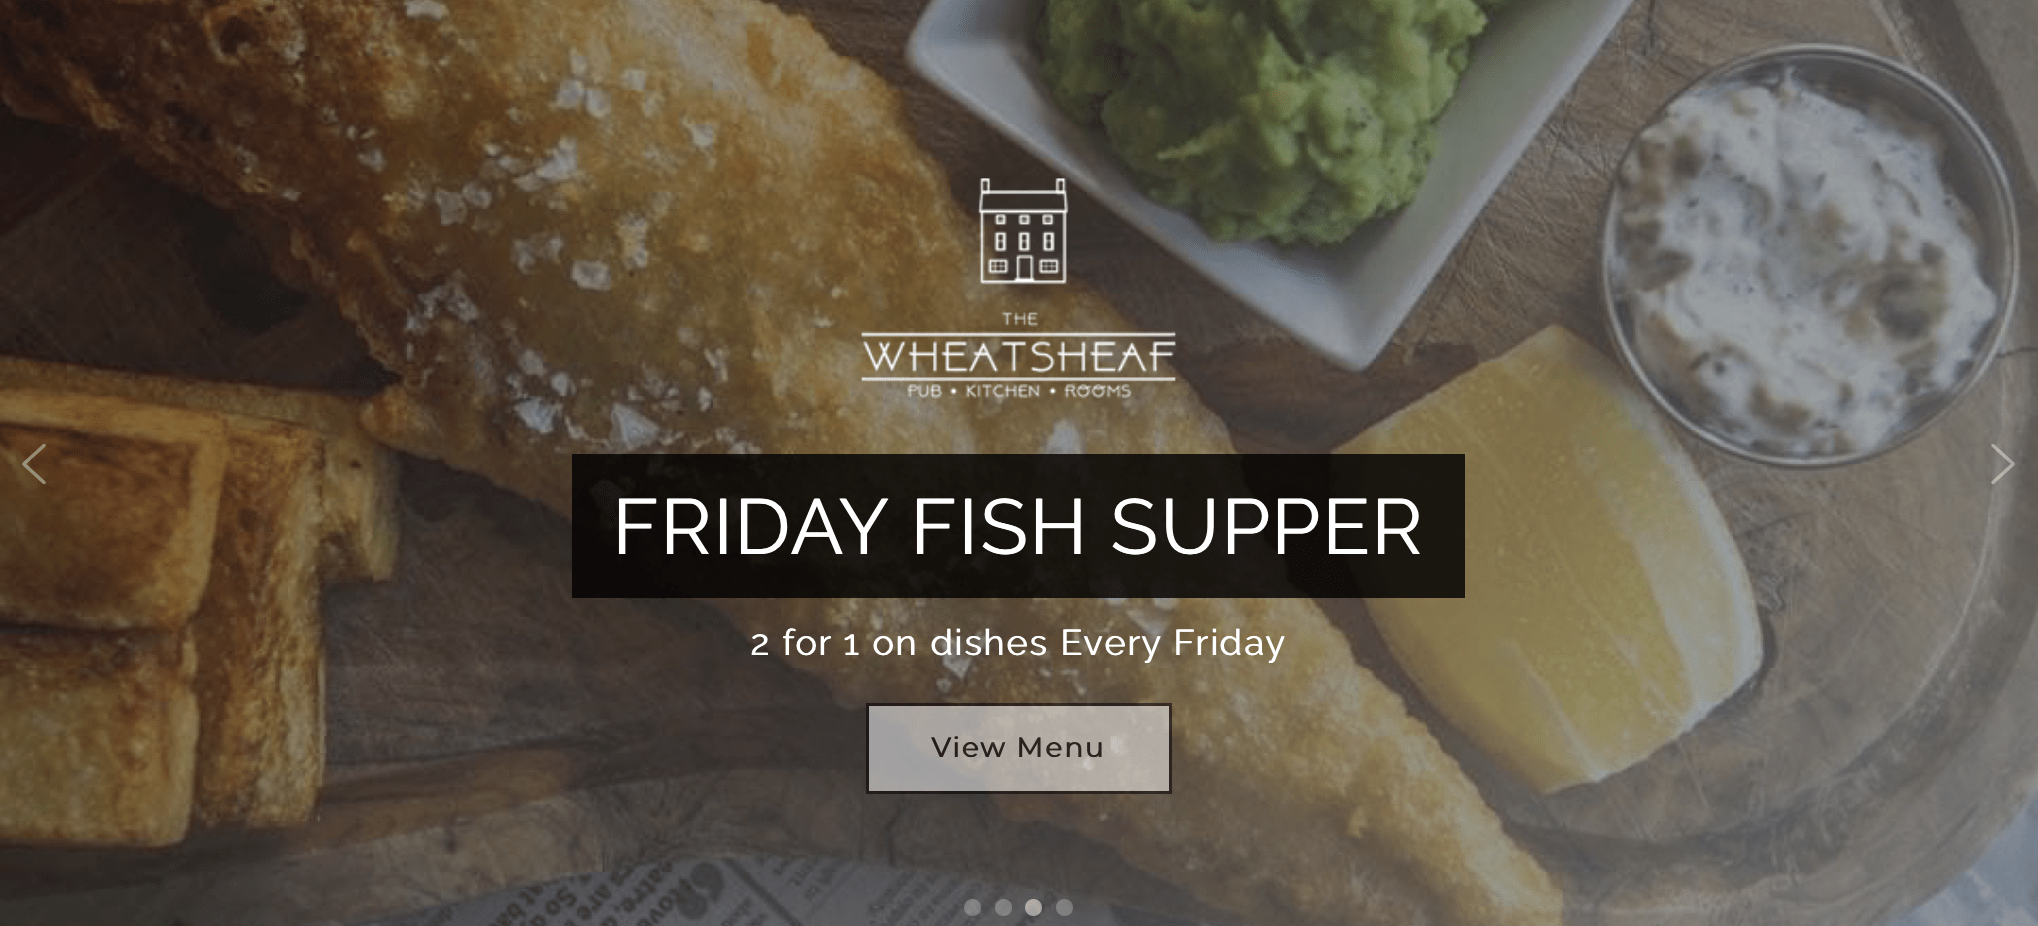 Friday Fish Supper